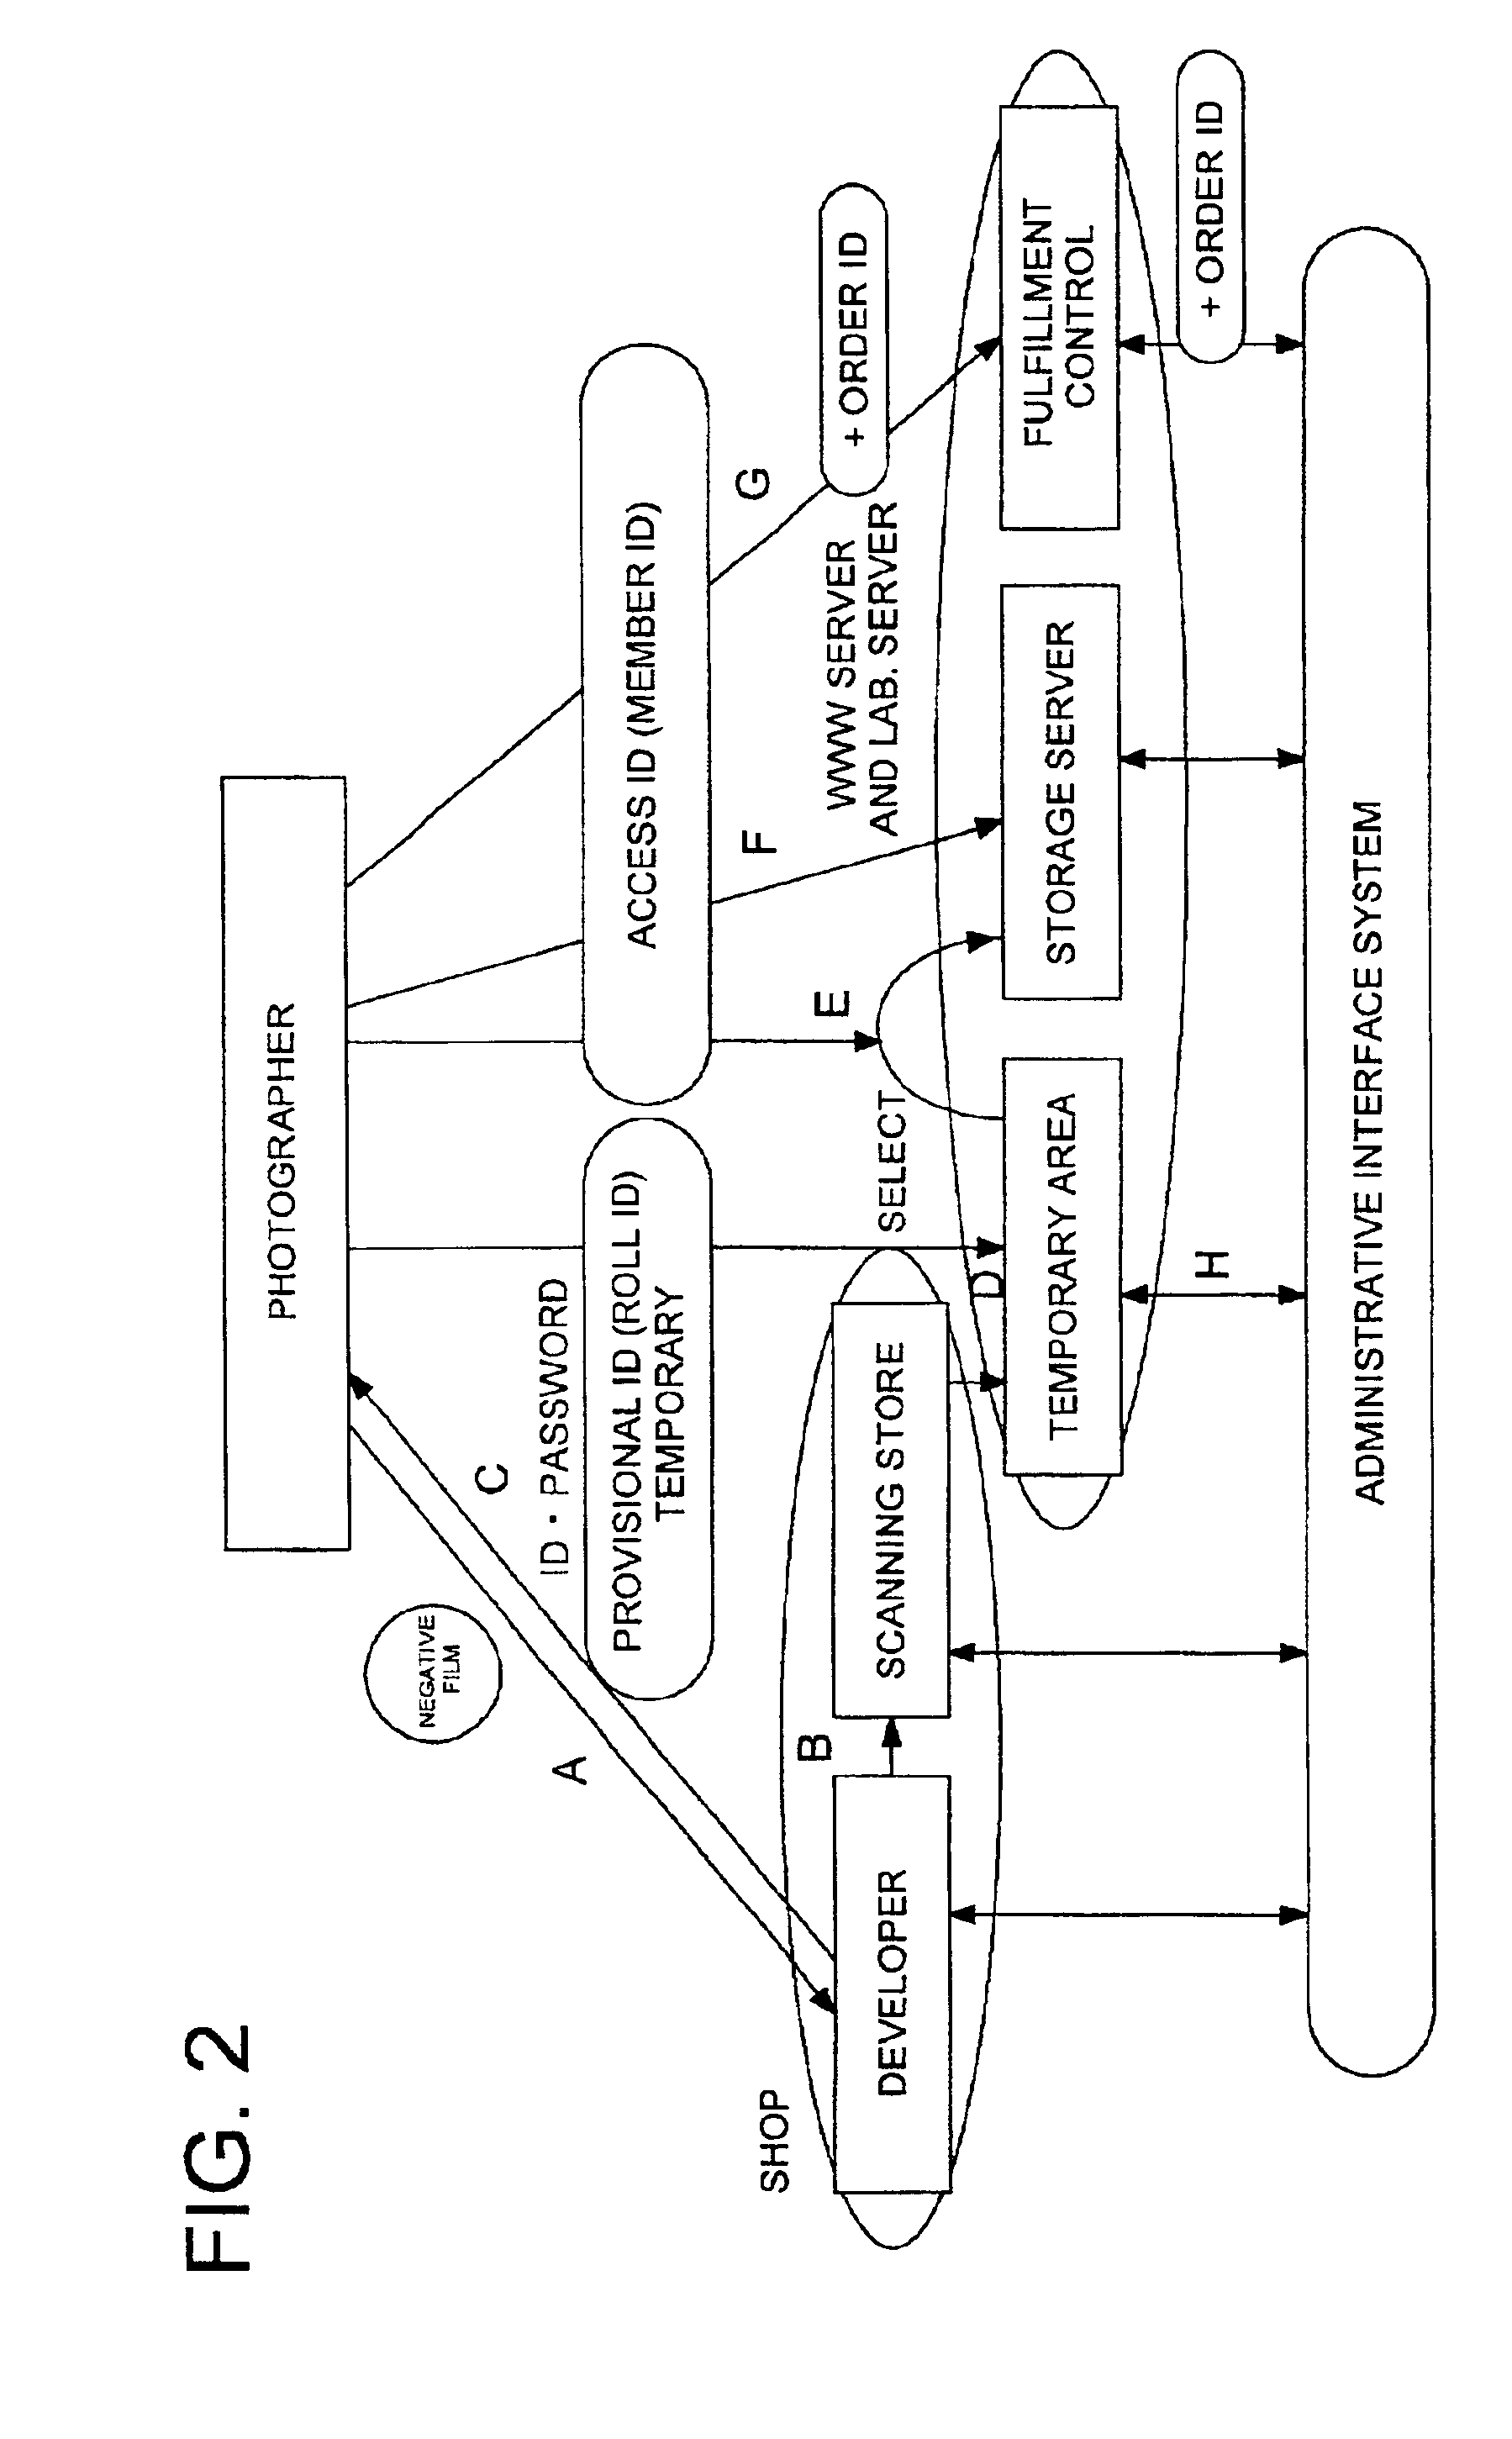 Image data processing system and server system